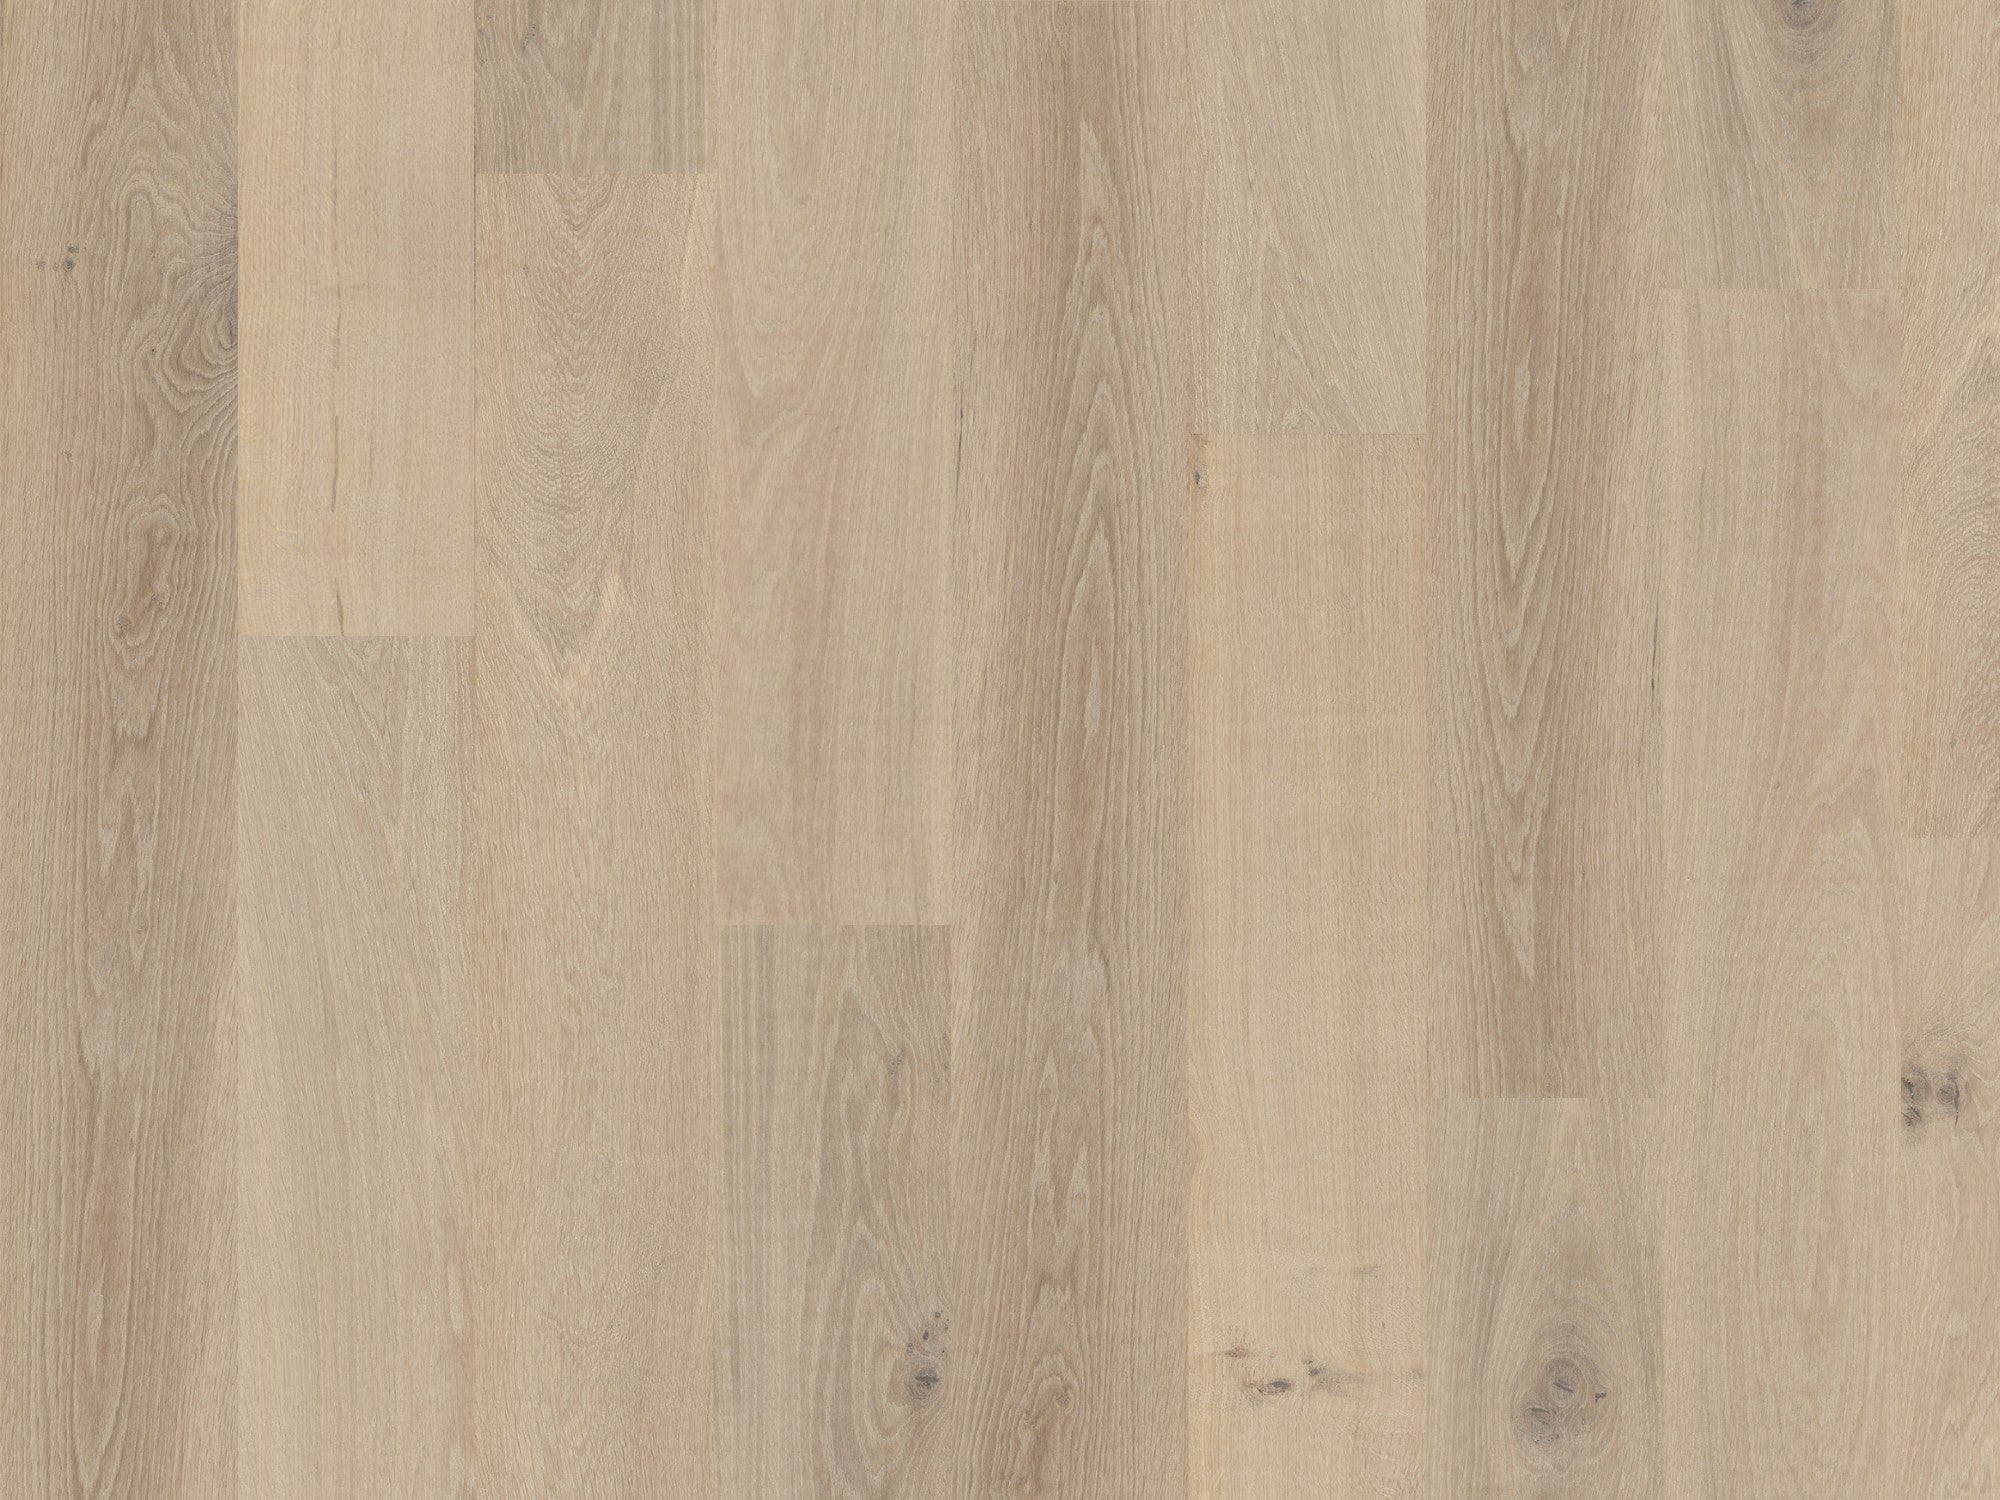 duchateau signature terra taiga european oak engineered hardnatural wood floor uv lacquer finish for interior use distributed by surface group international